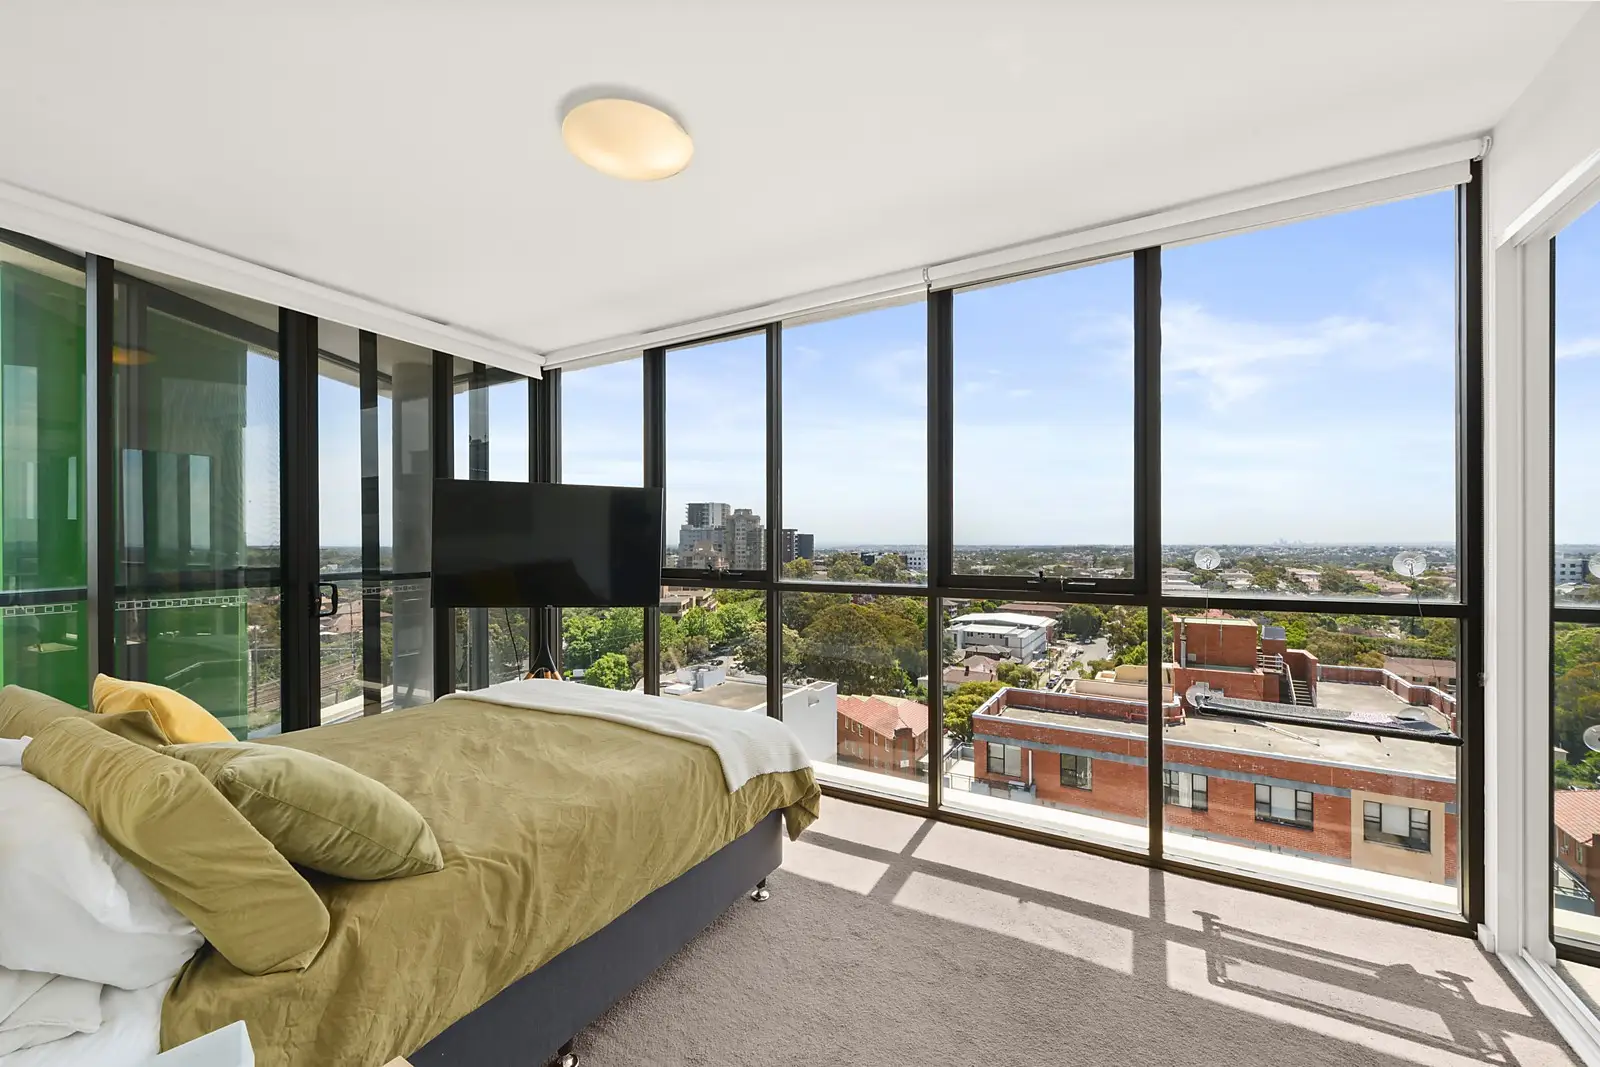 Photo #1: 1001/380 Forest Road, Hurstville - Sold by Sydney Sotheby's International Realty